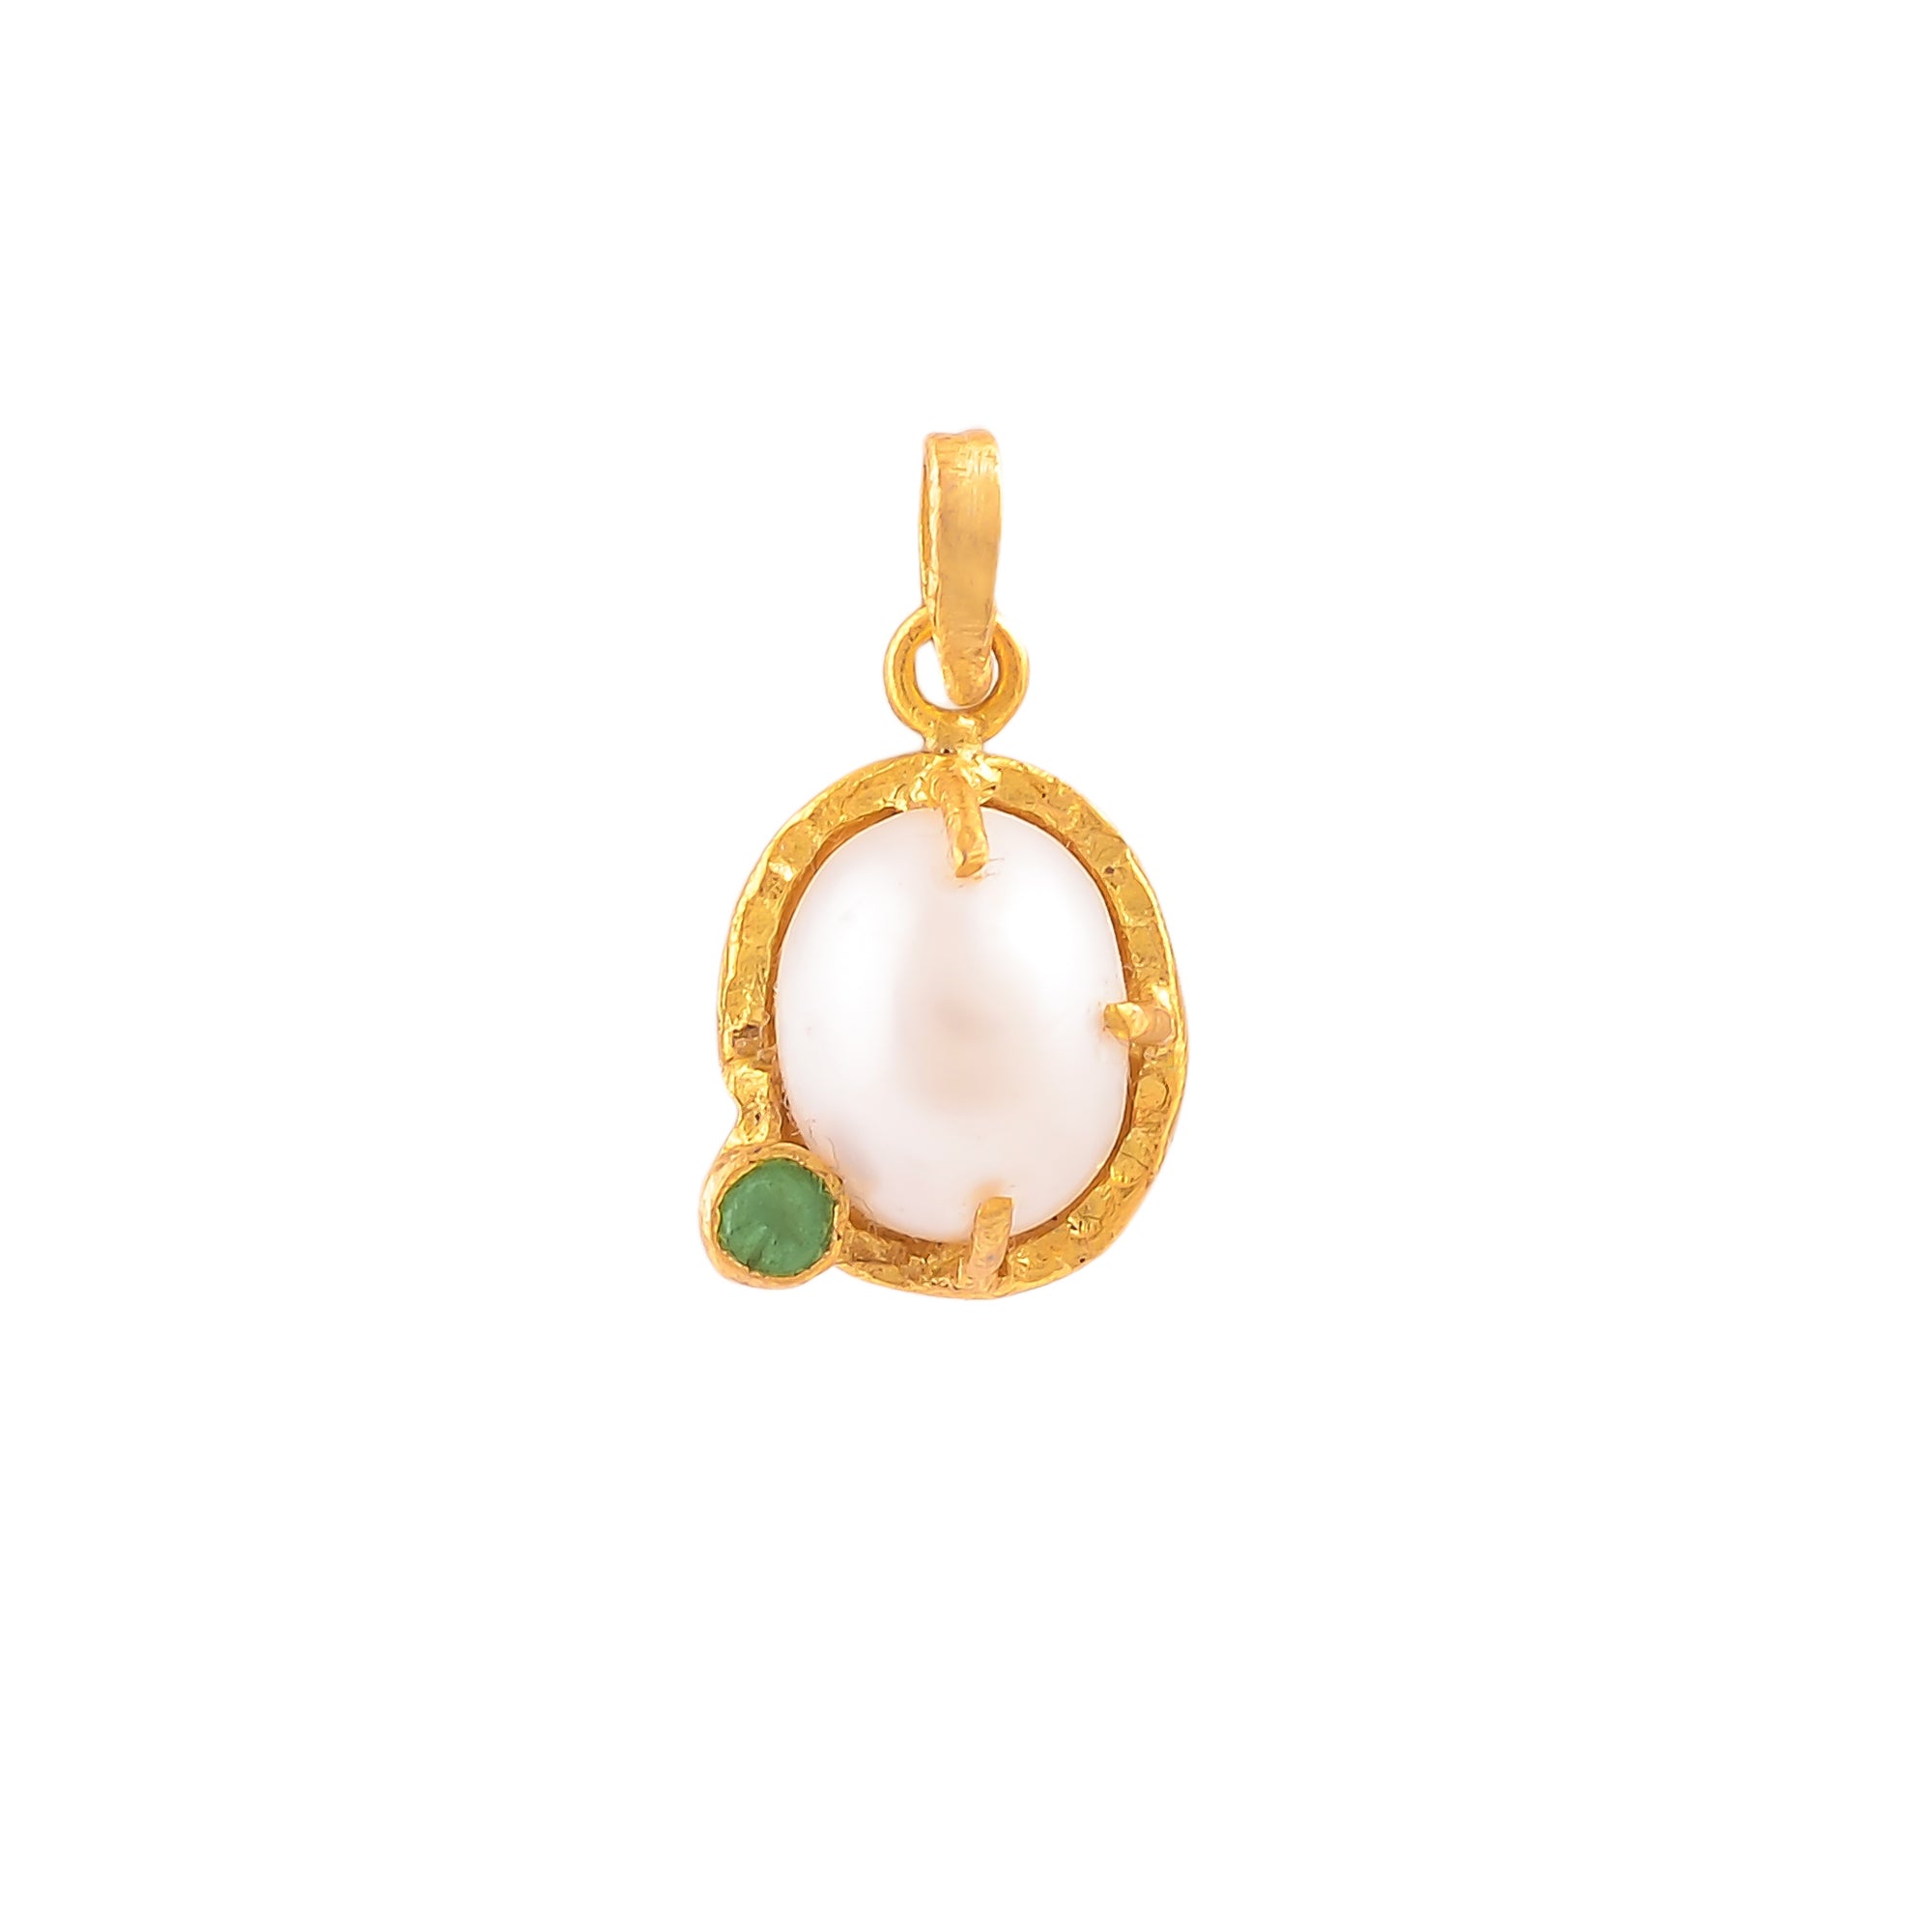 Buy Indian Handmade Silver Gold Plated Pearl / Emerald Pendant